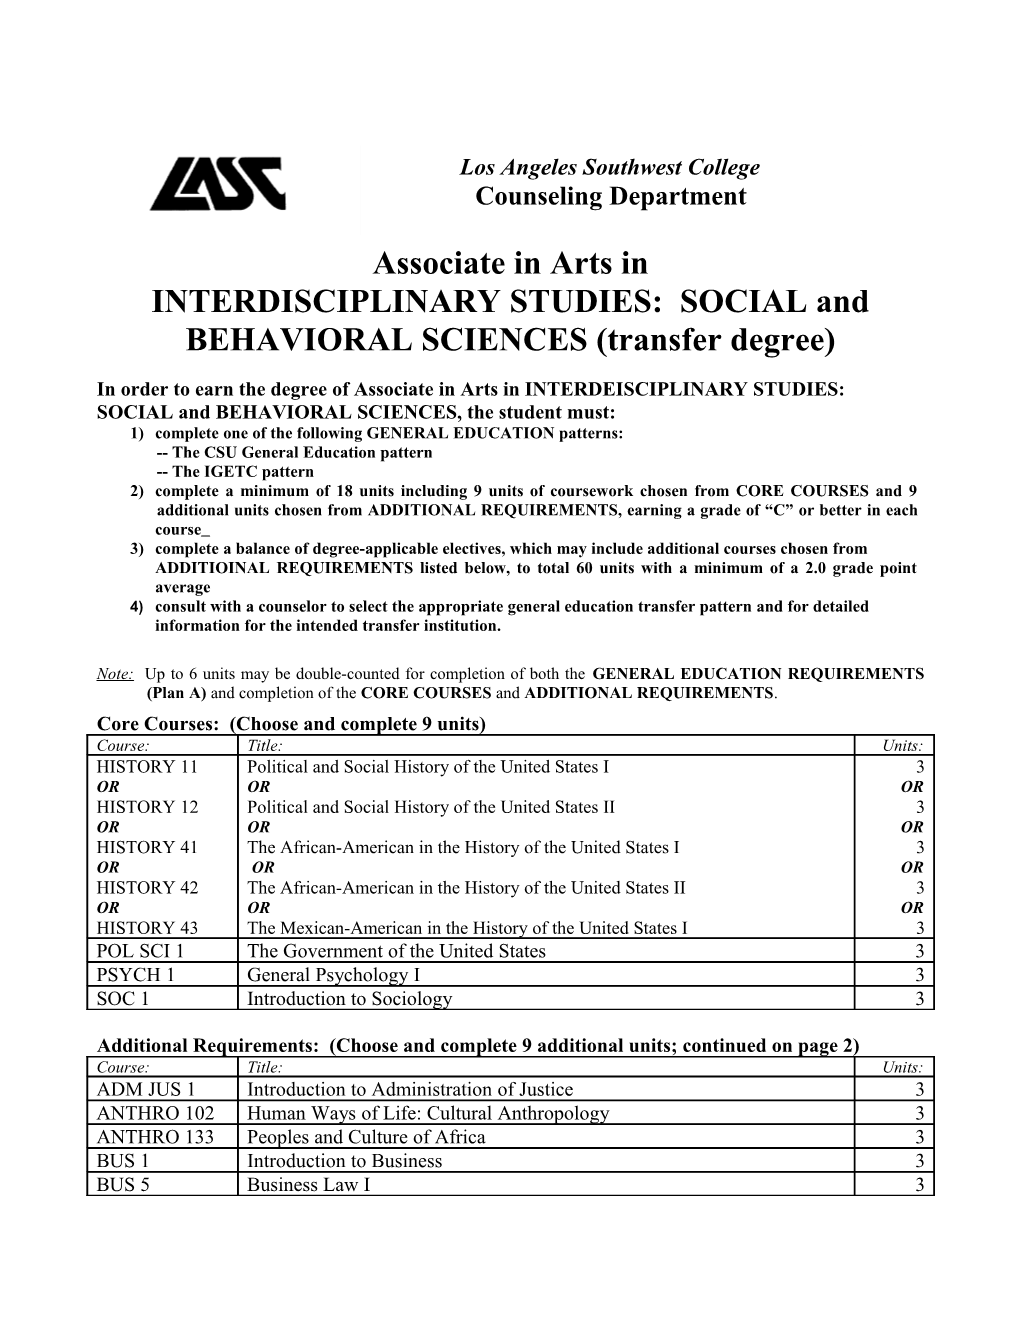 INTERDISCIPLINARY STUDIES: BEHAVIORAL and SOCIAL SCIENCES (Transfer Degree) Page 1 of 2